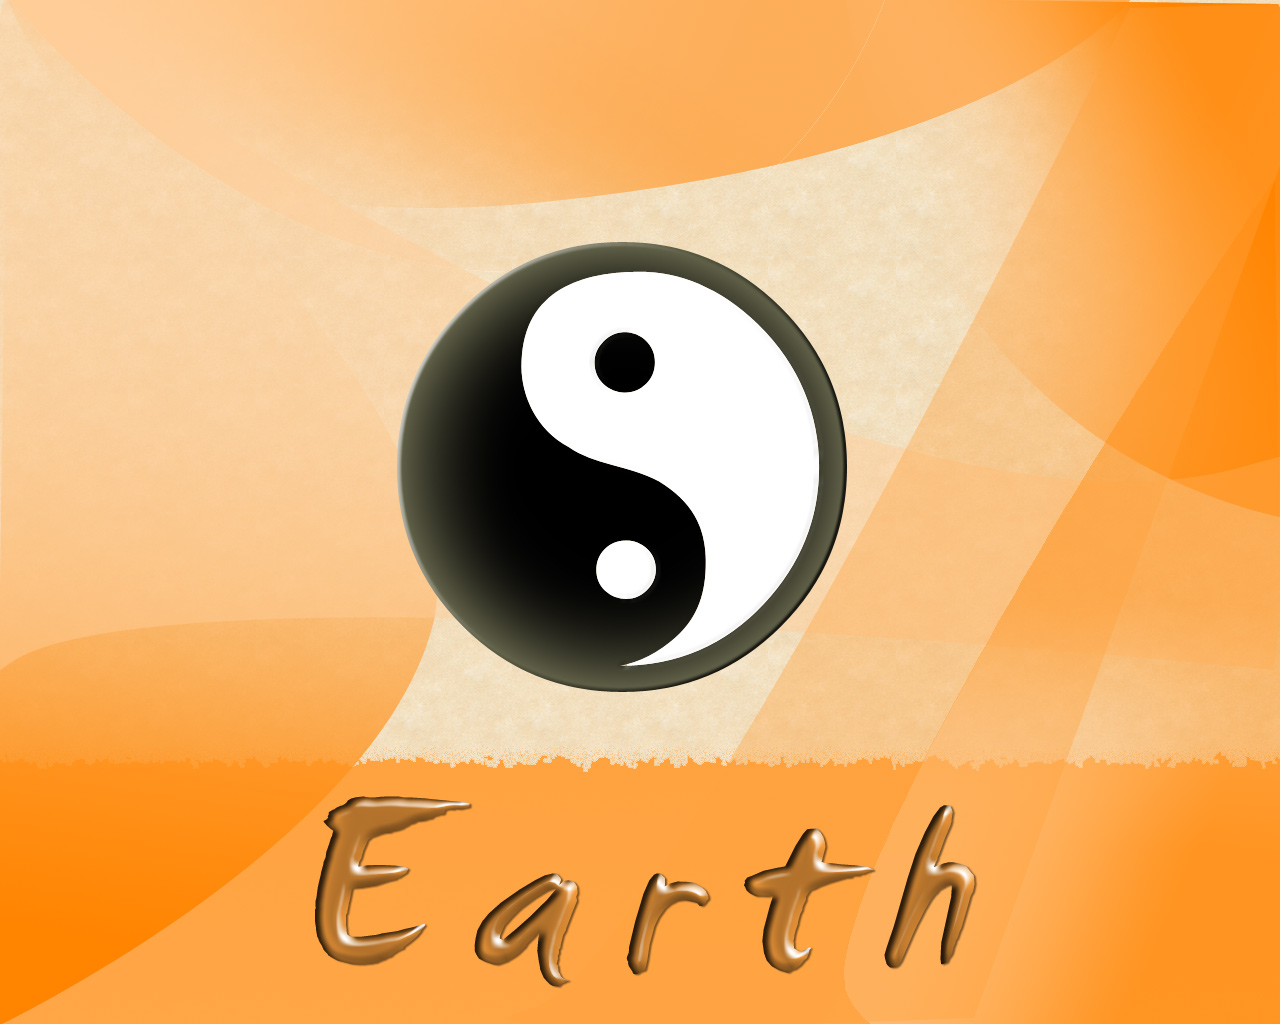 Earth Feng Shui Wallpaper Doctrine Articles And E Books